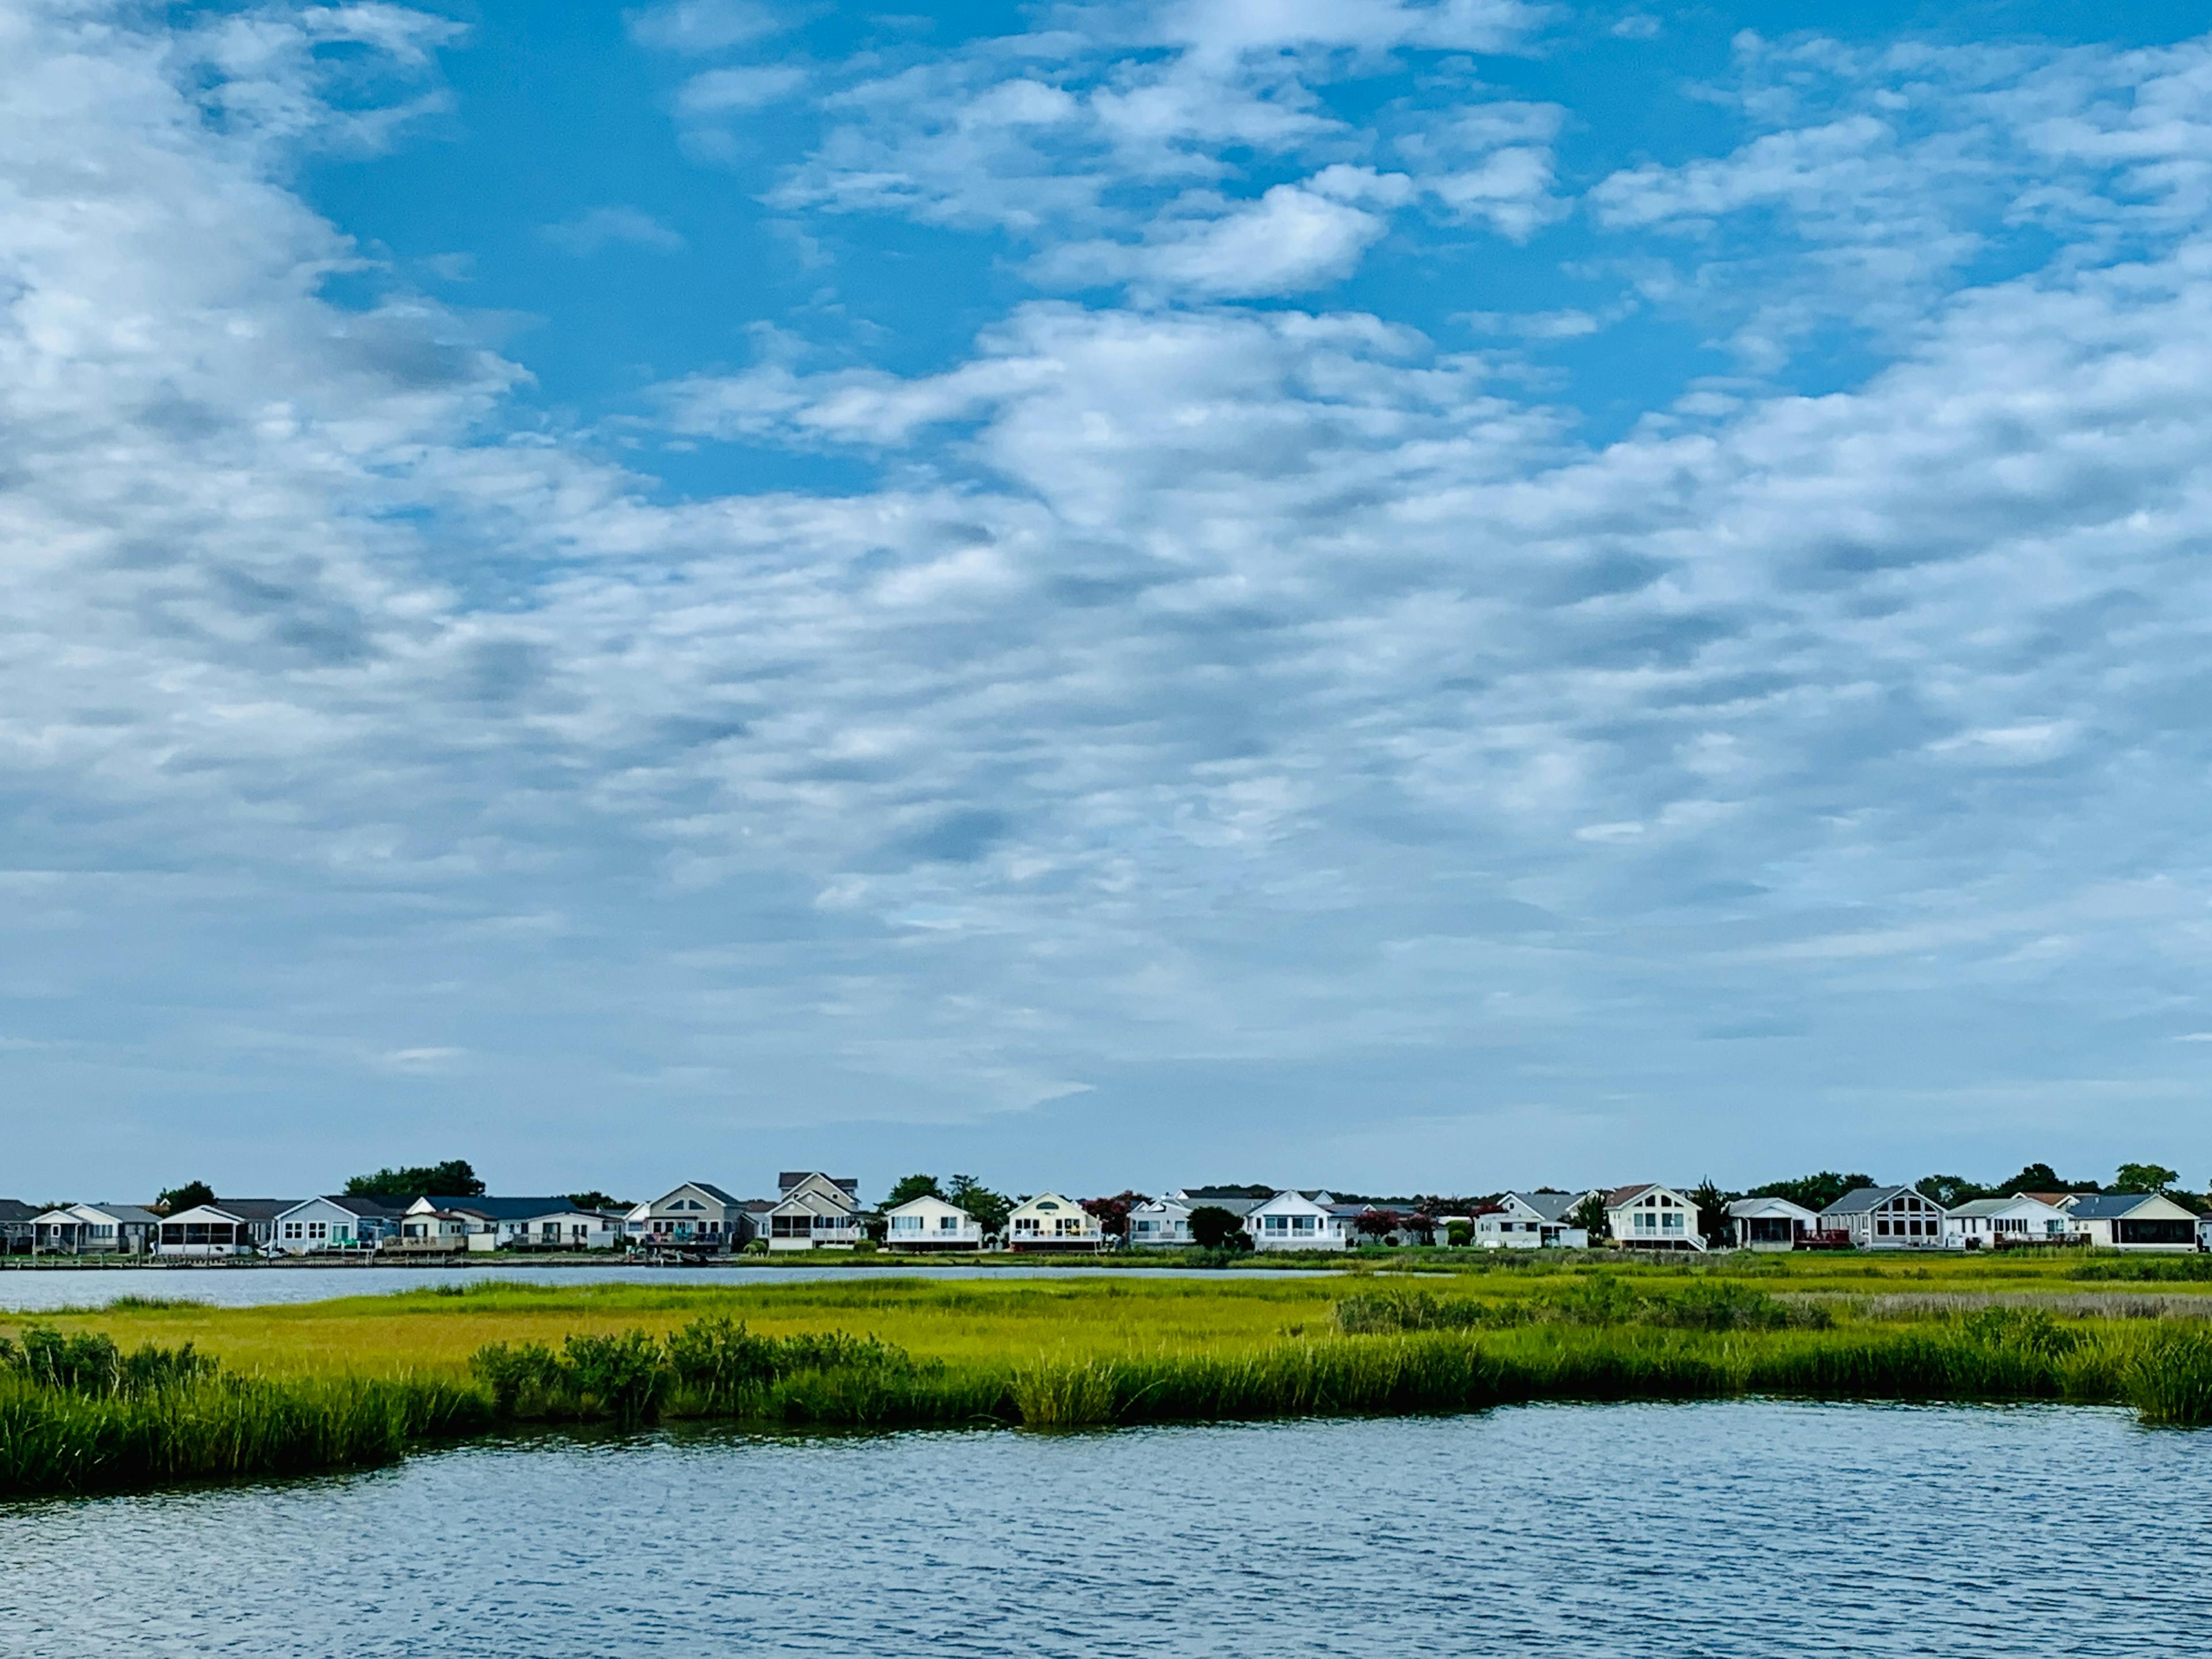 houses next to body of water and marshland